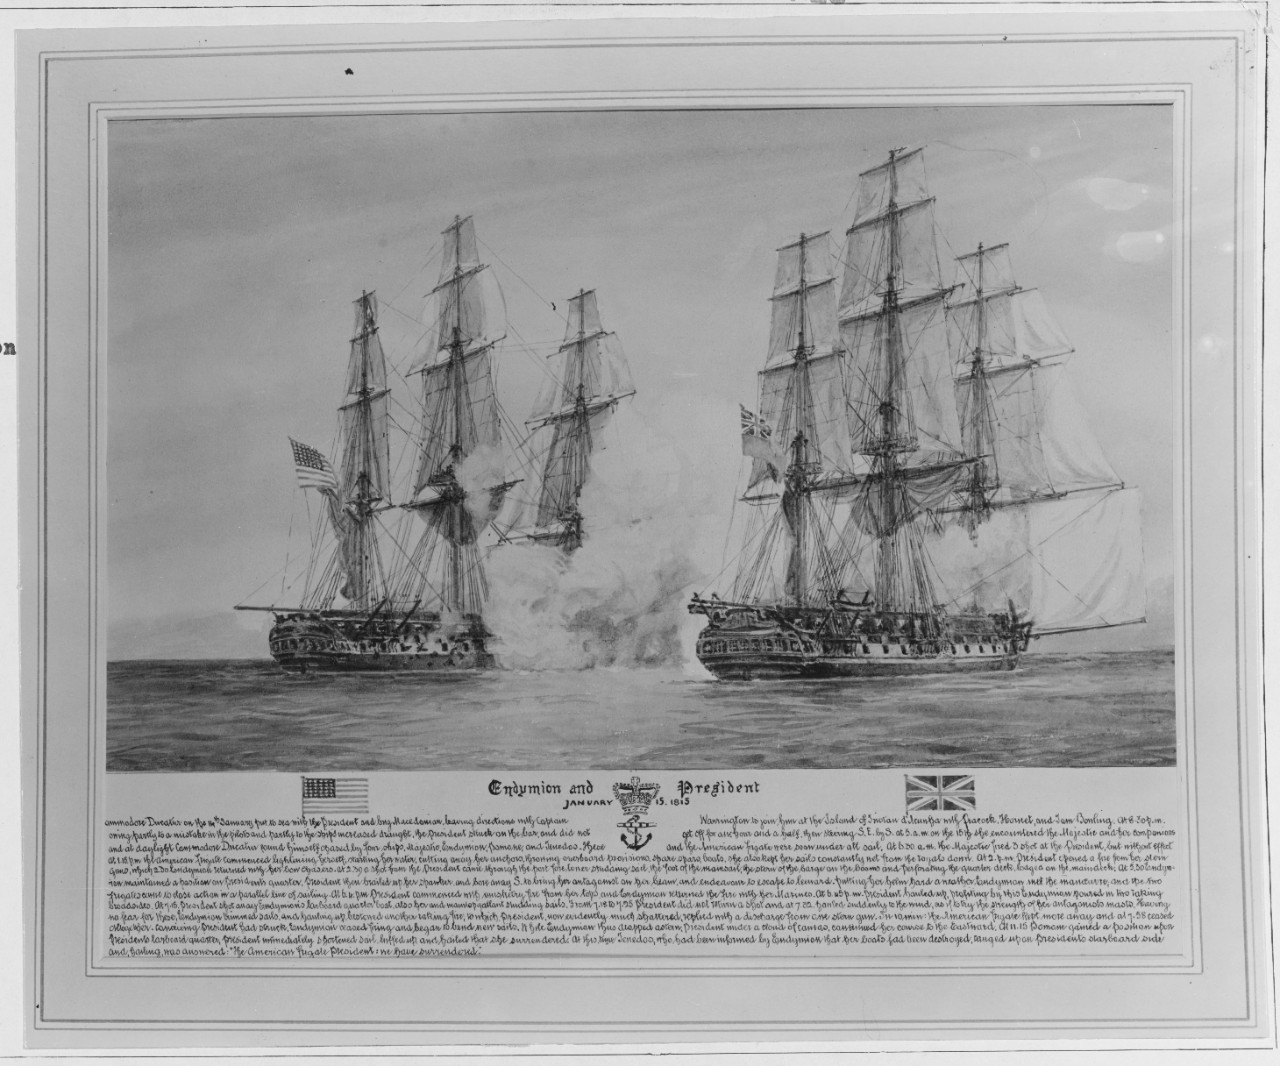 Battle between HMS ENDYMION and USS PRESIDENT, 15 January 1815